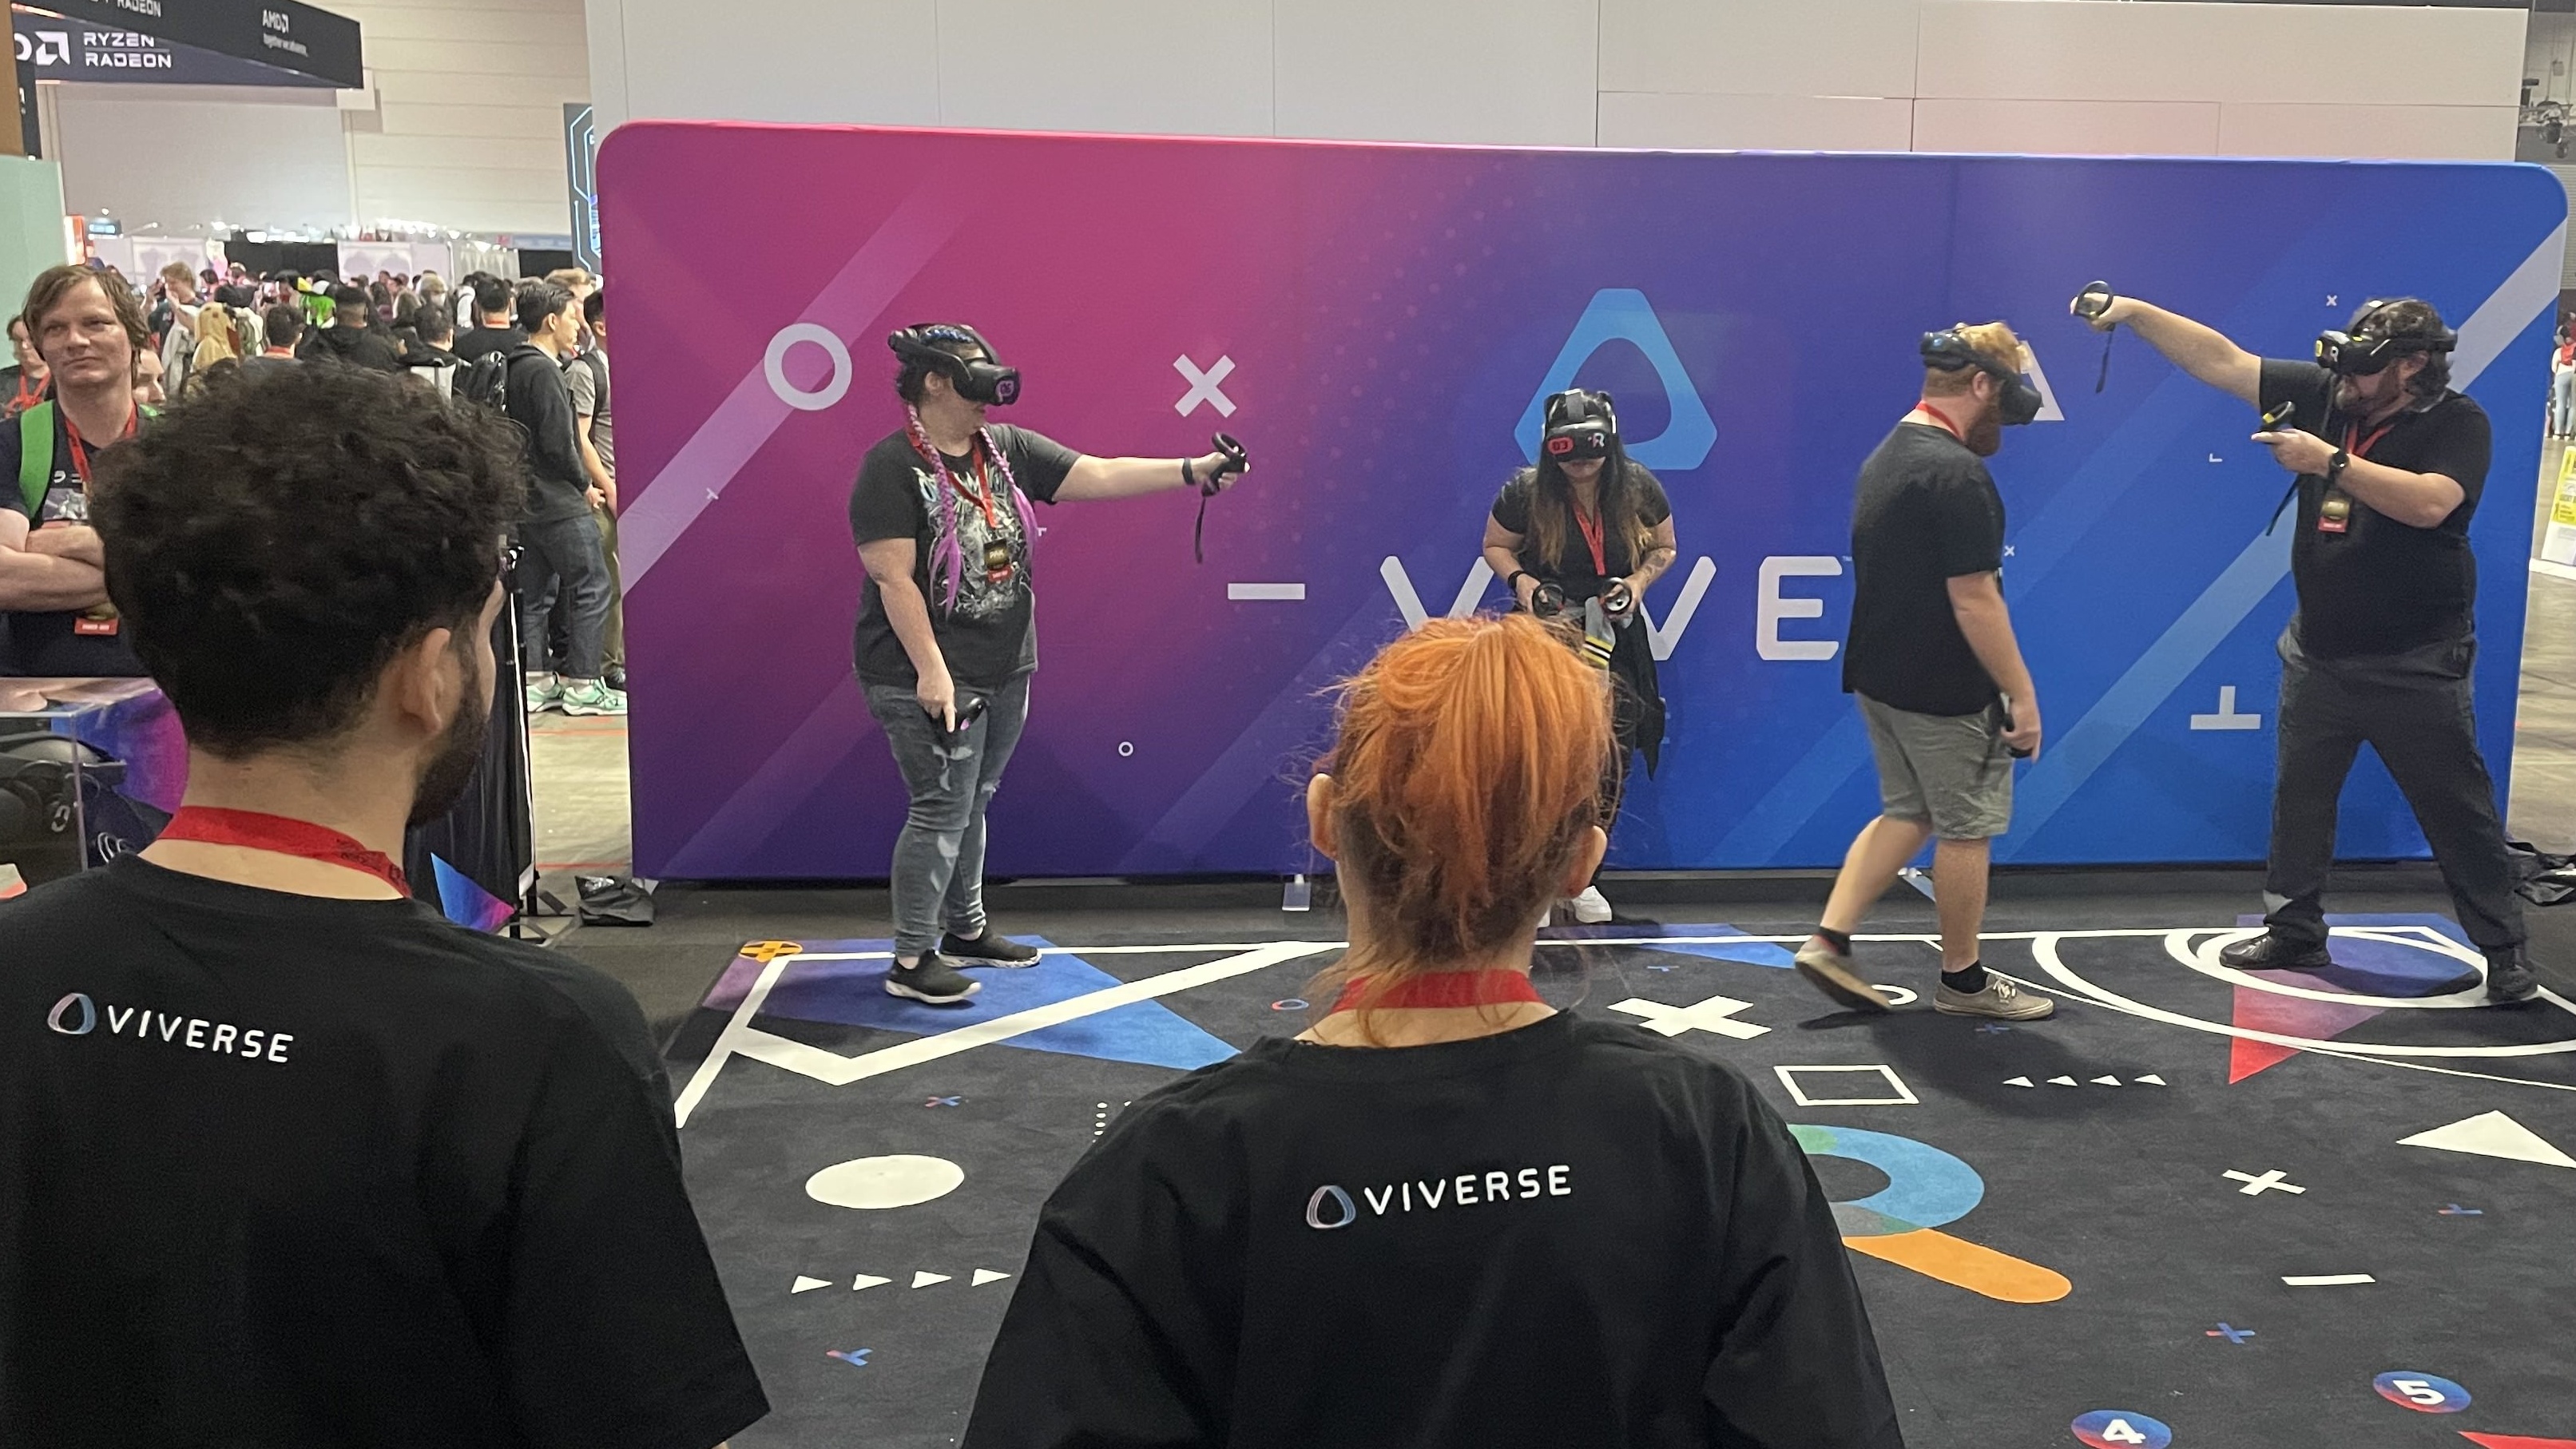 The Vive laser tag stand in the PAX Aus 2022 pavilion.